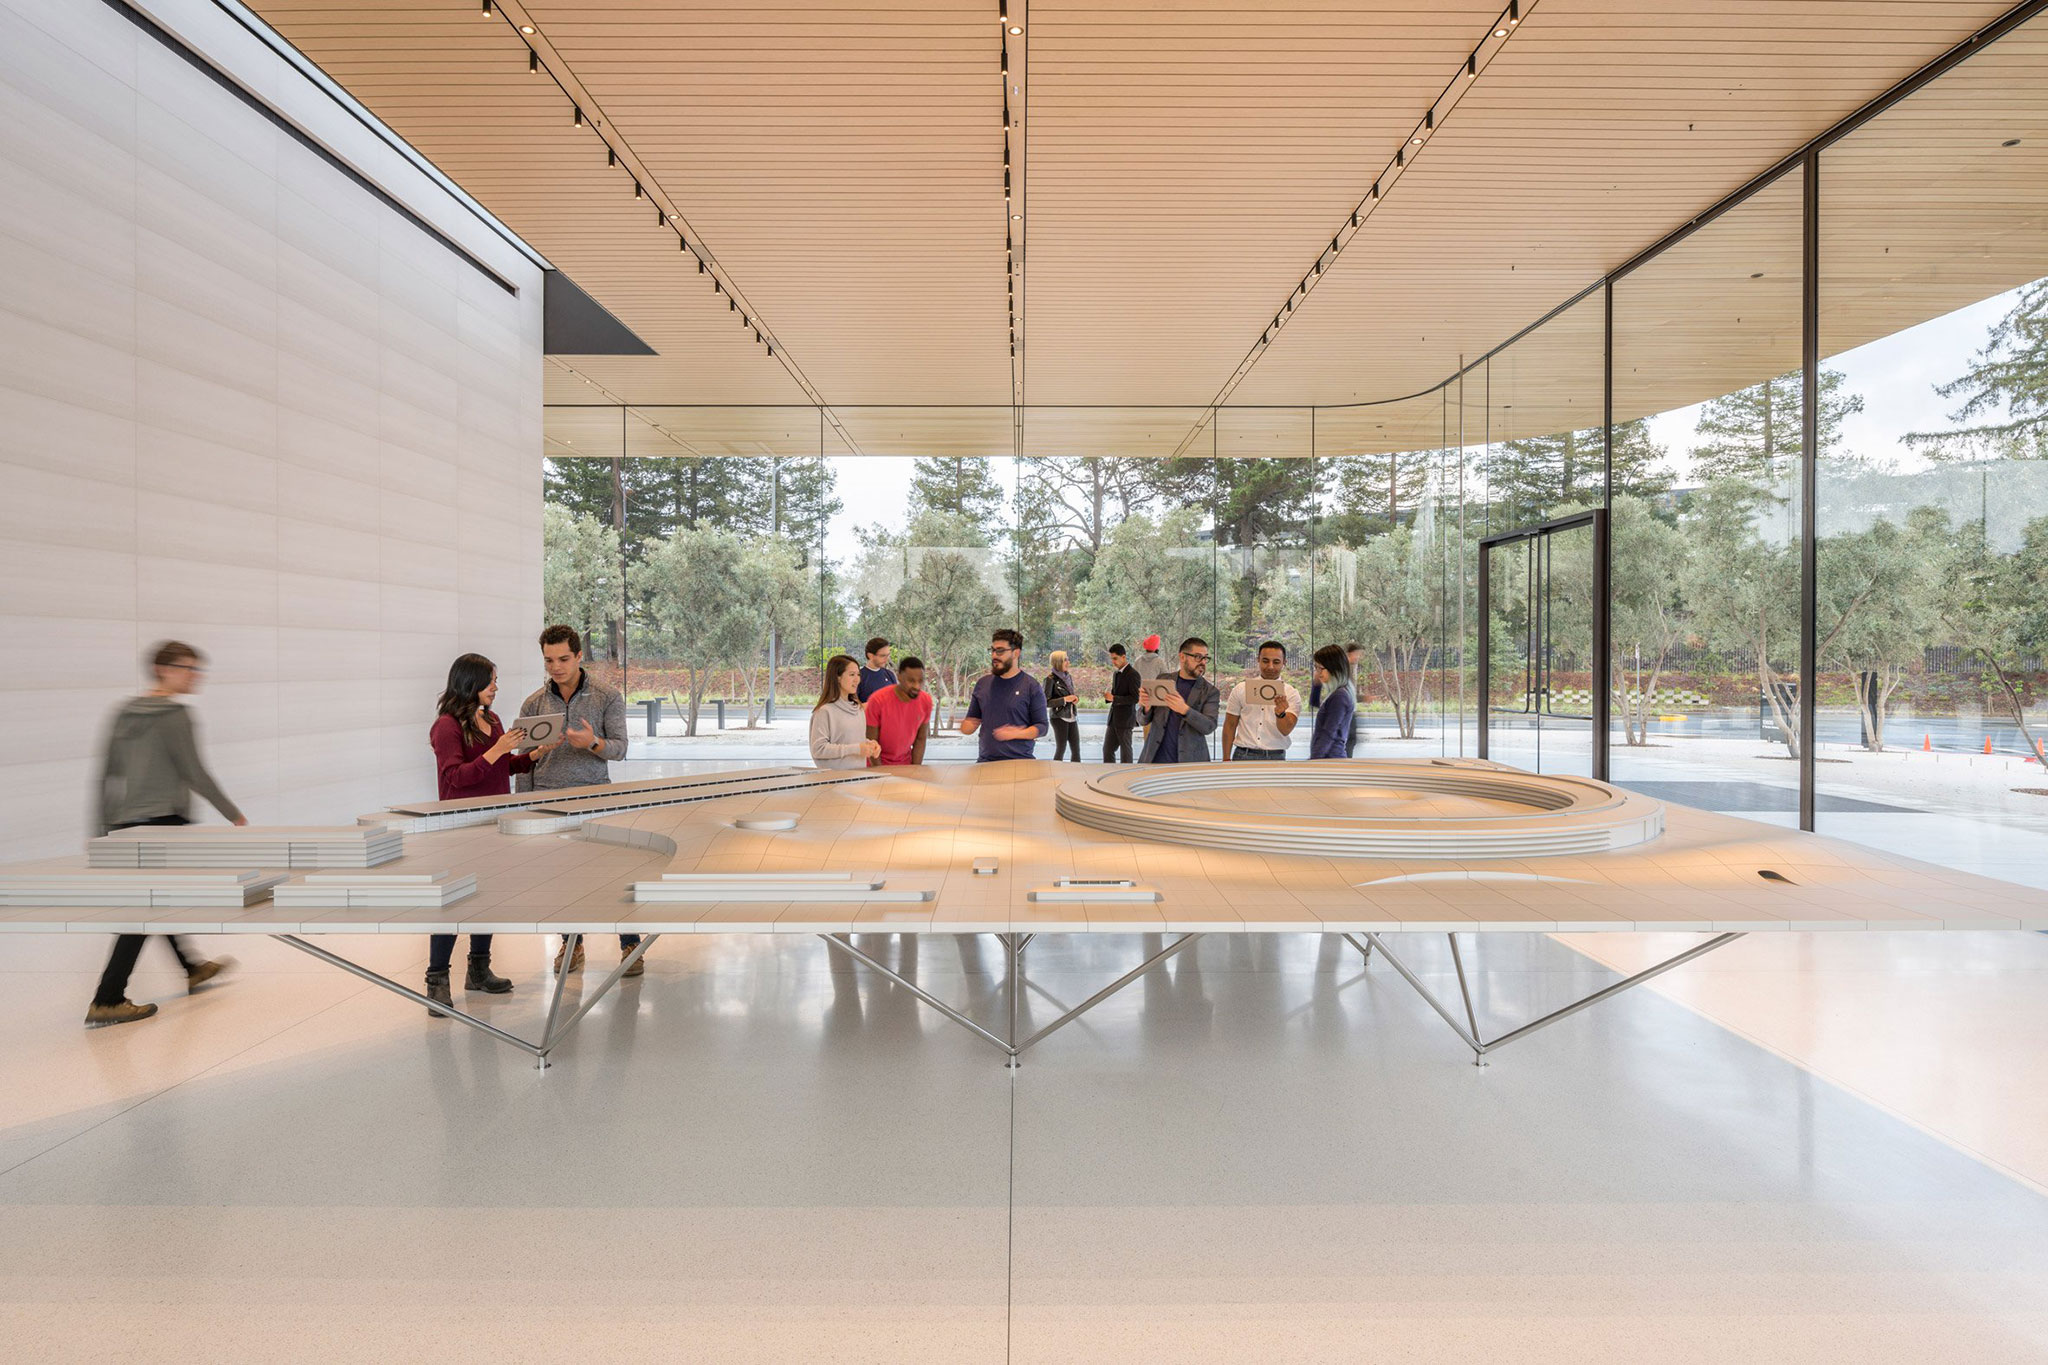 Apple Park Visitor Center, designed by Foster + Partners, opens to the